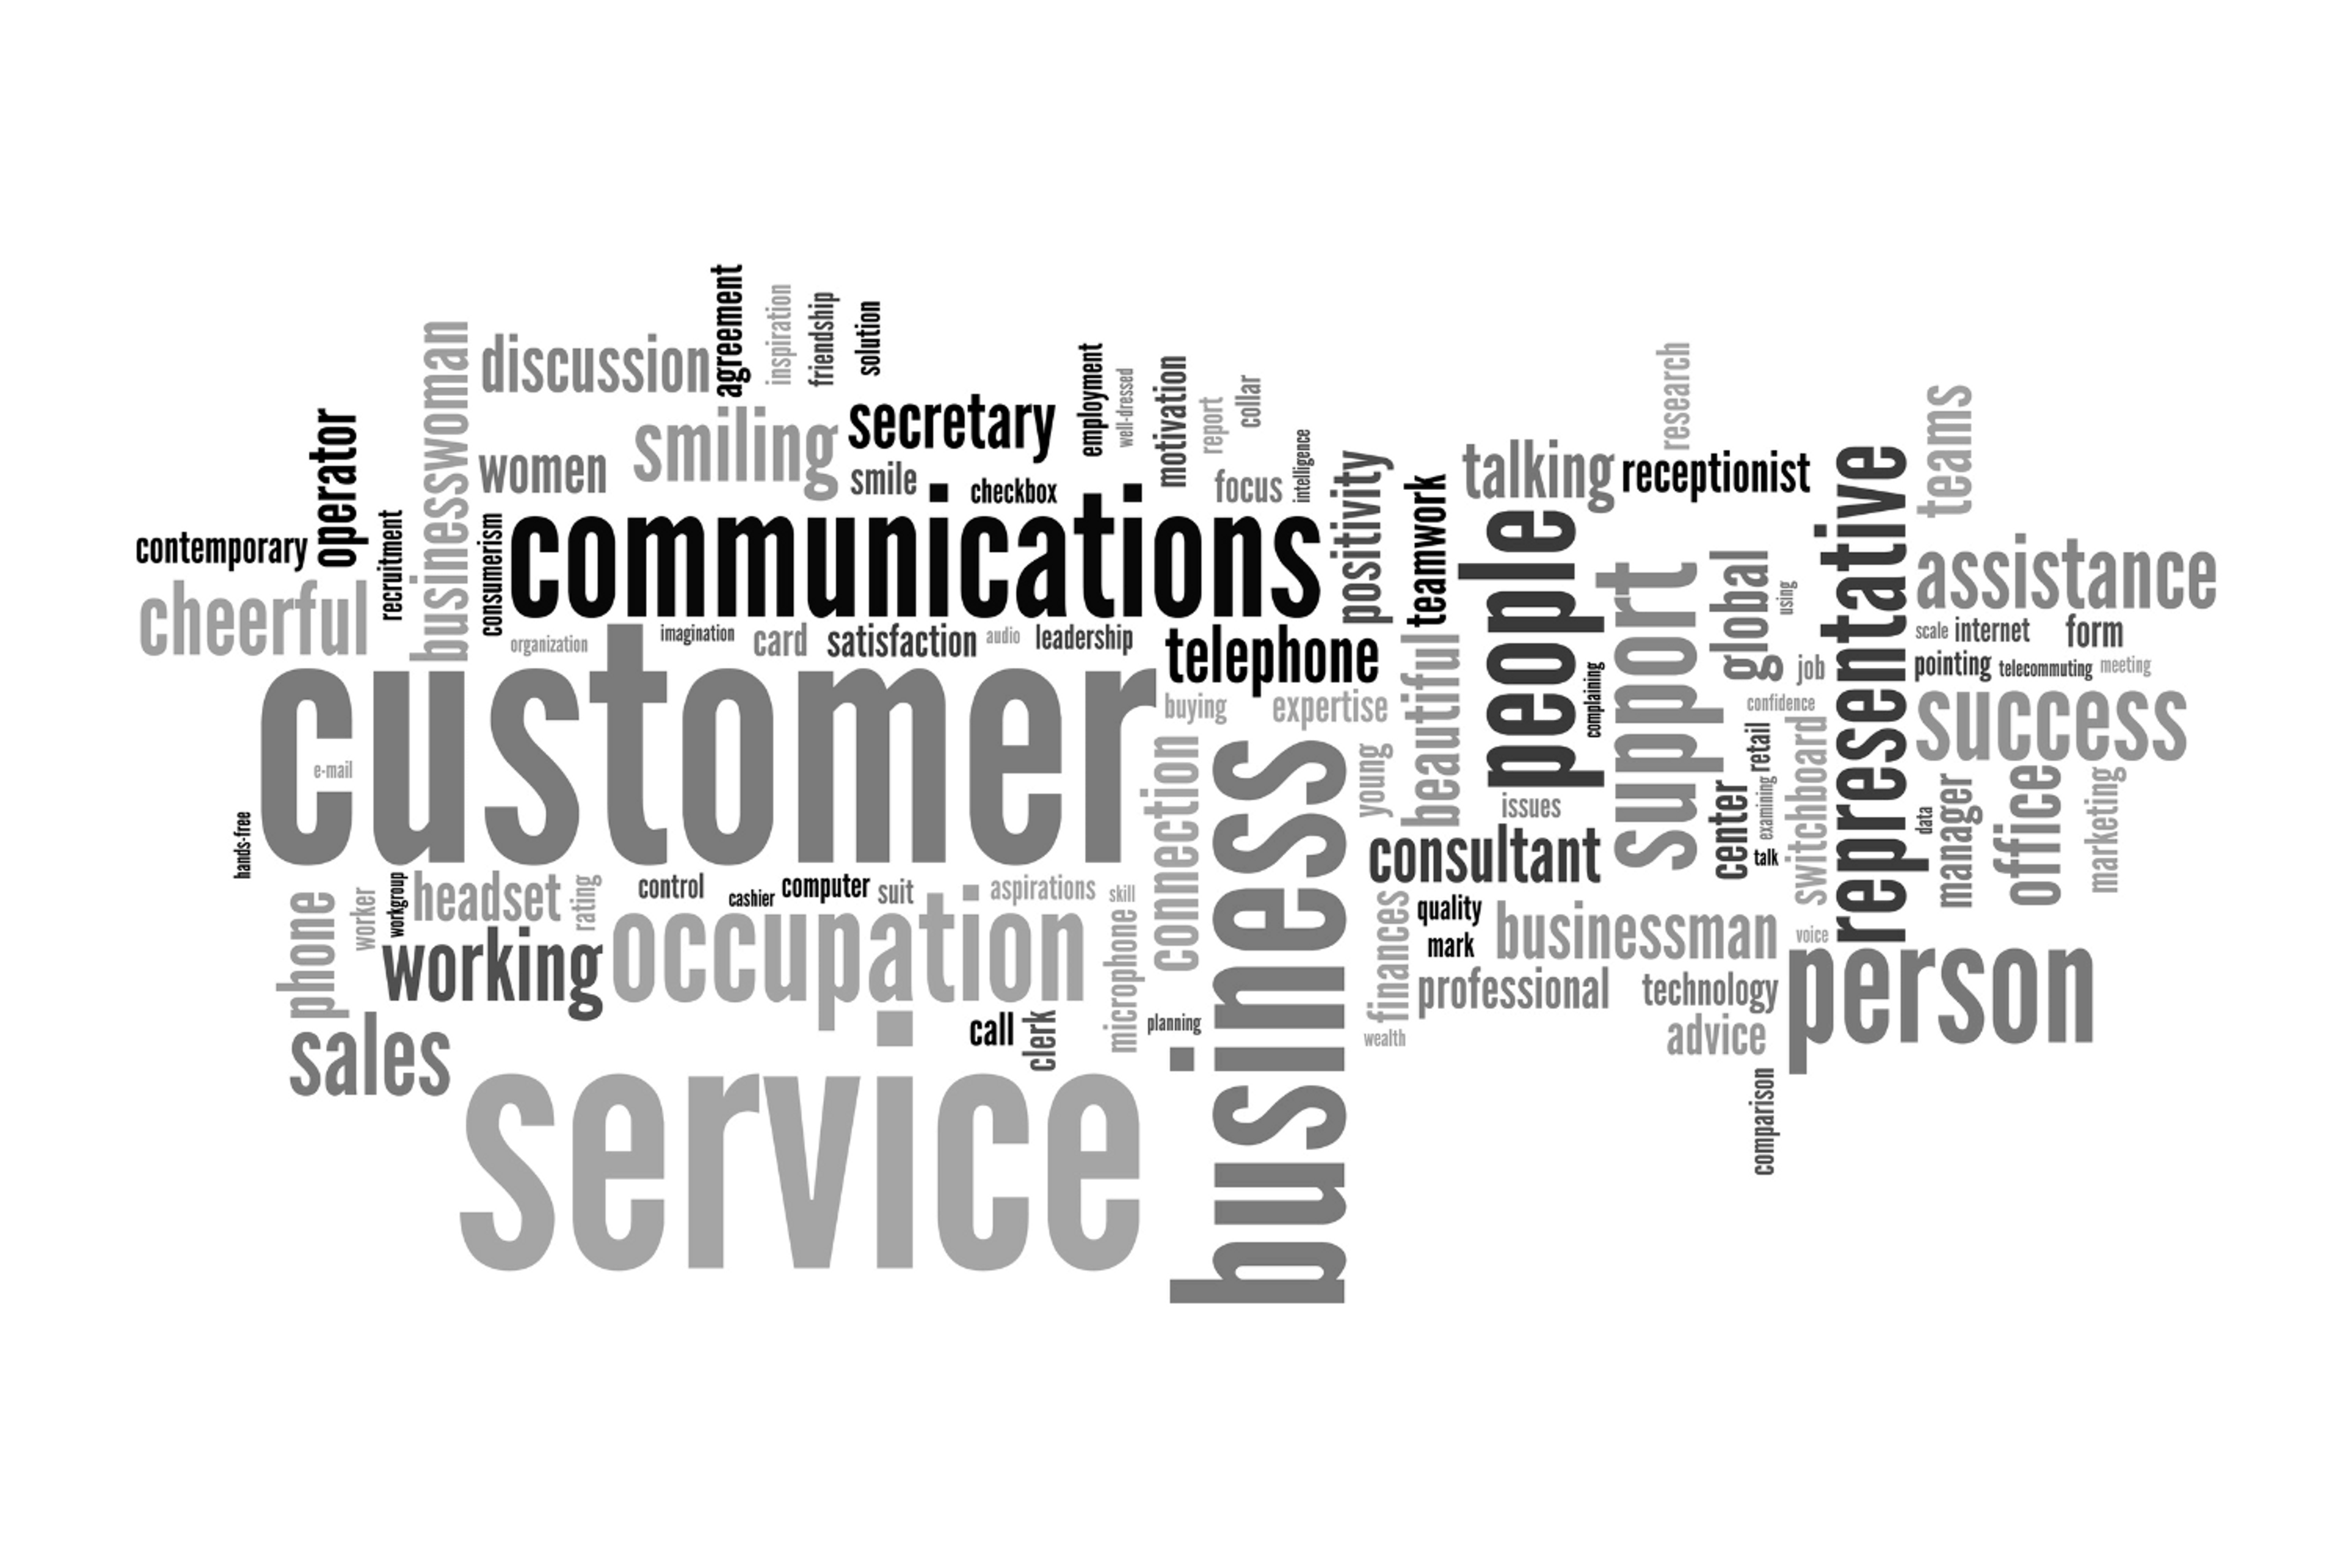 A montage of keywords showing the core values in customer service.